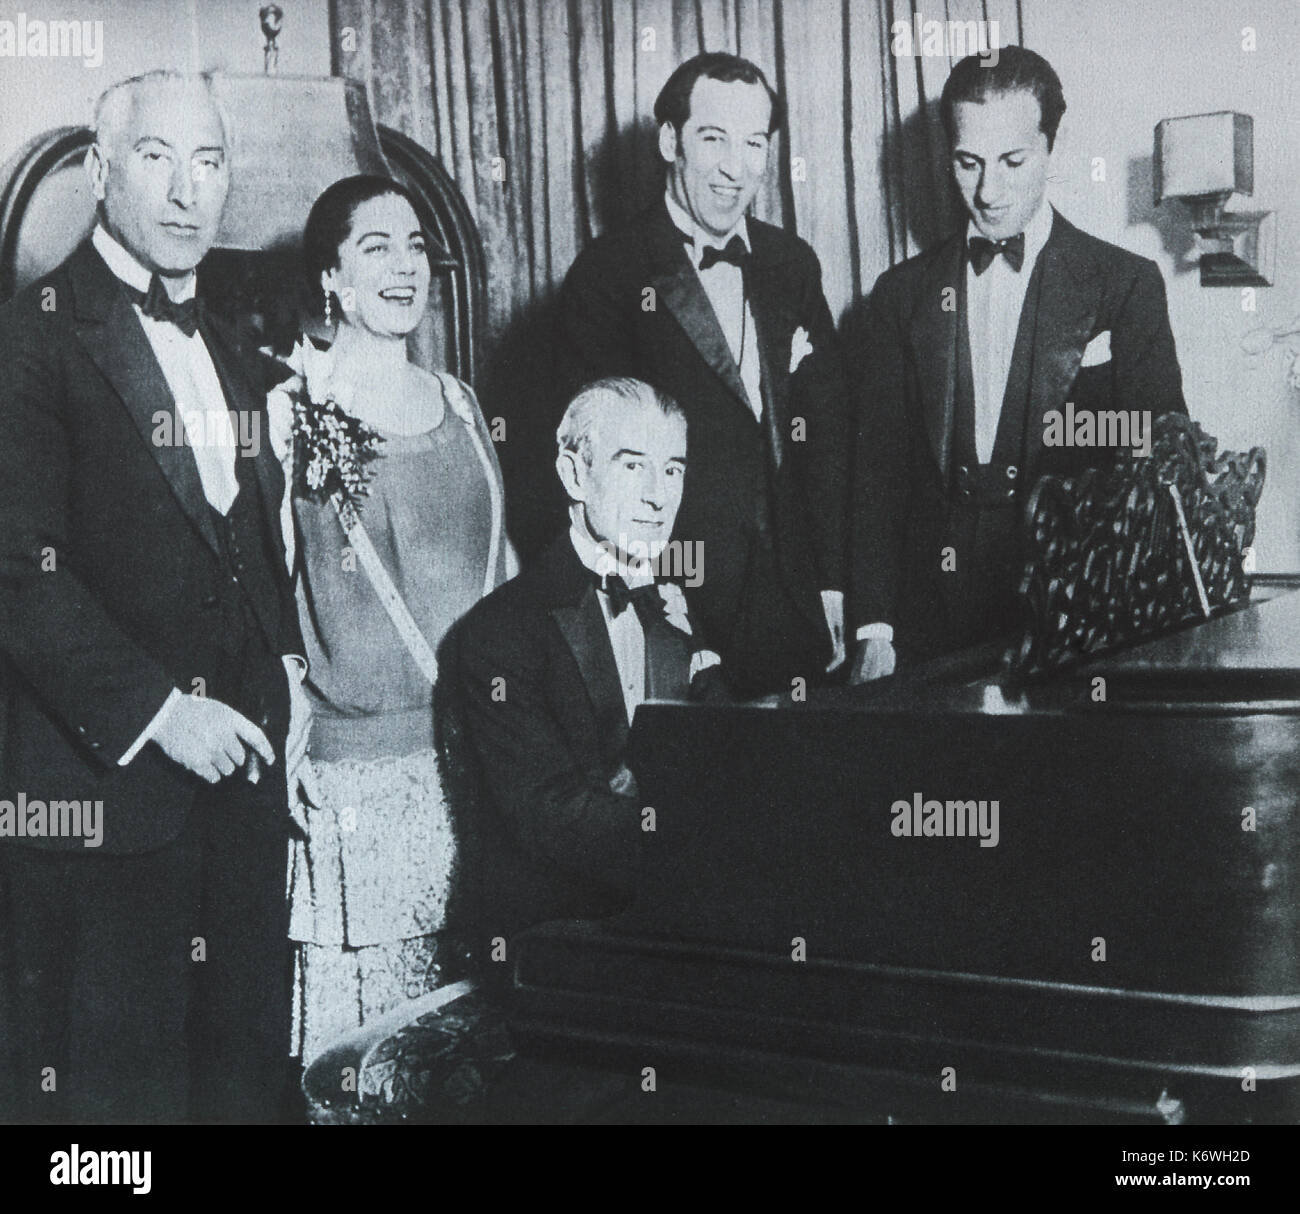 RAVEL, Maurice - playing  Rhapsody in Blue on the piano on his 53rd birthday (1928) for George GERSHWIN (who composed the piece) and friends at Eva Gauthier's party.  French Composer, 1875-1937 Stock Photo